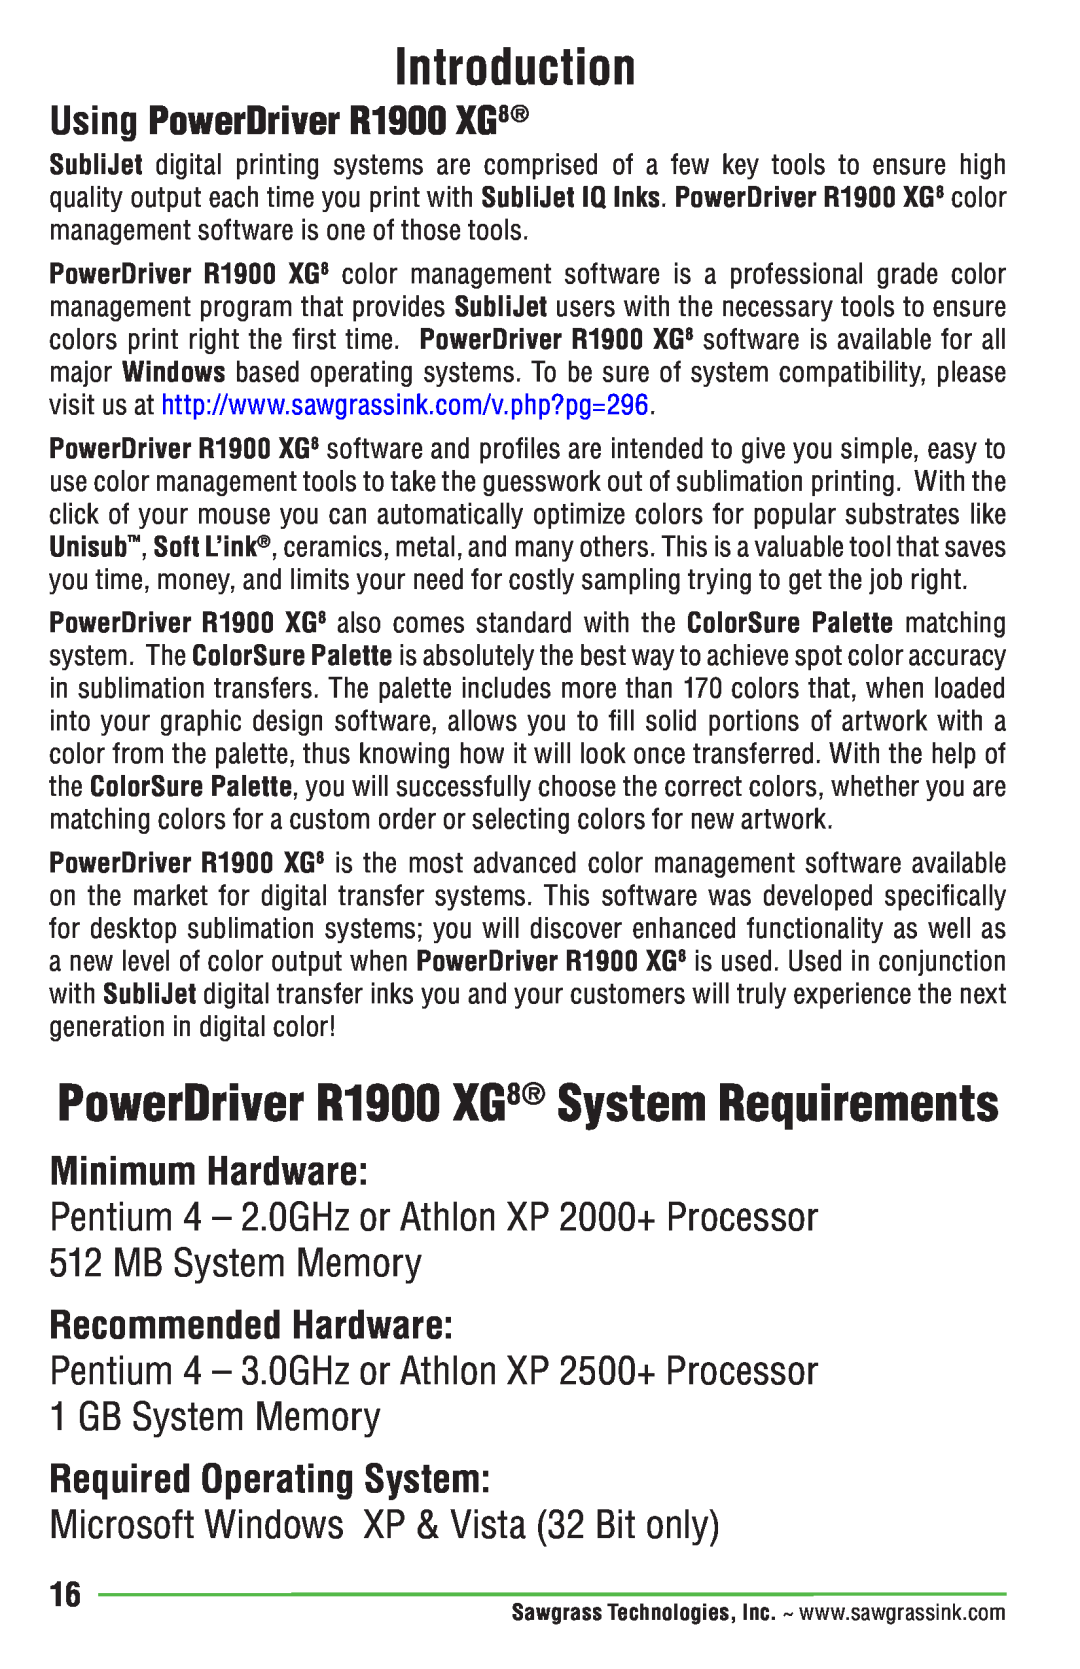 Epson Introduction, Minimum Hardware, Recommended Hardware, Required Operating System, Using PowerDriver R1900 XG8 